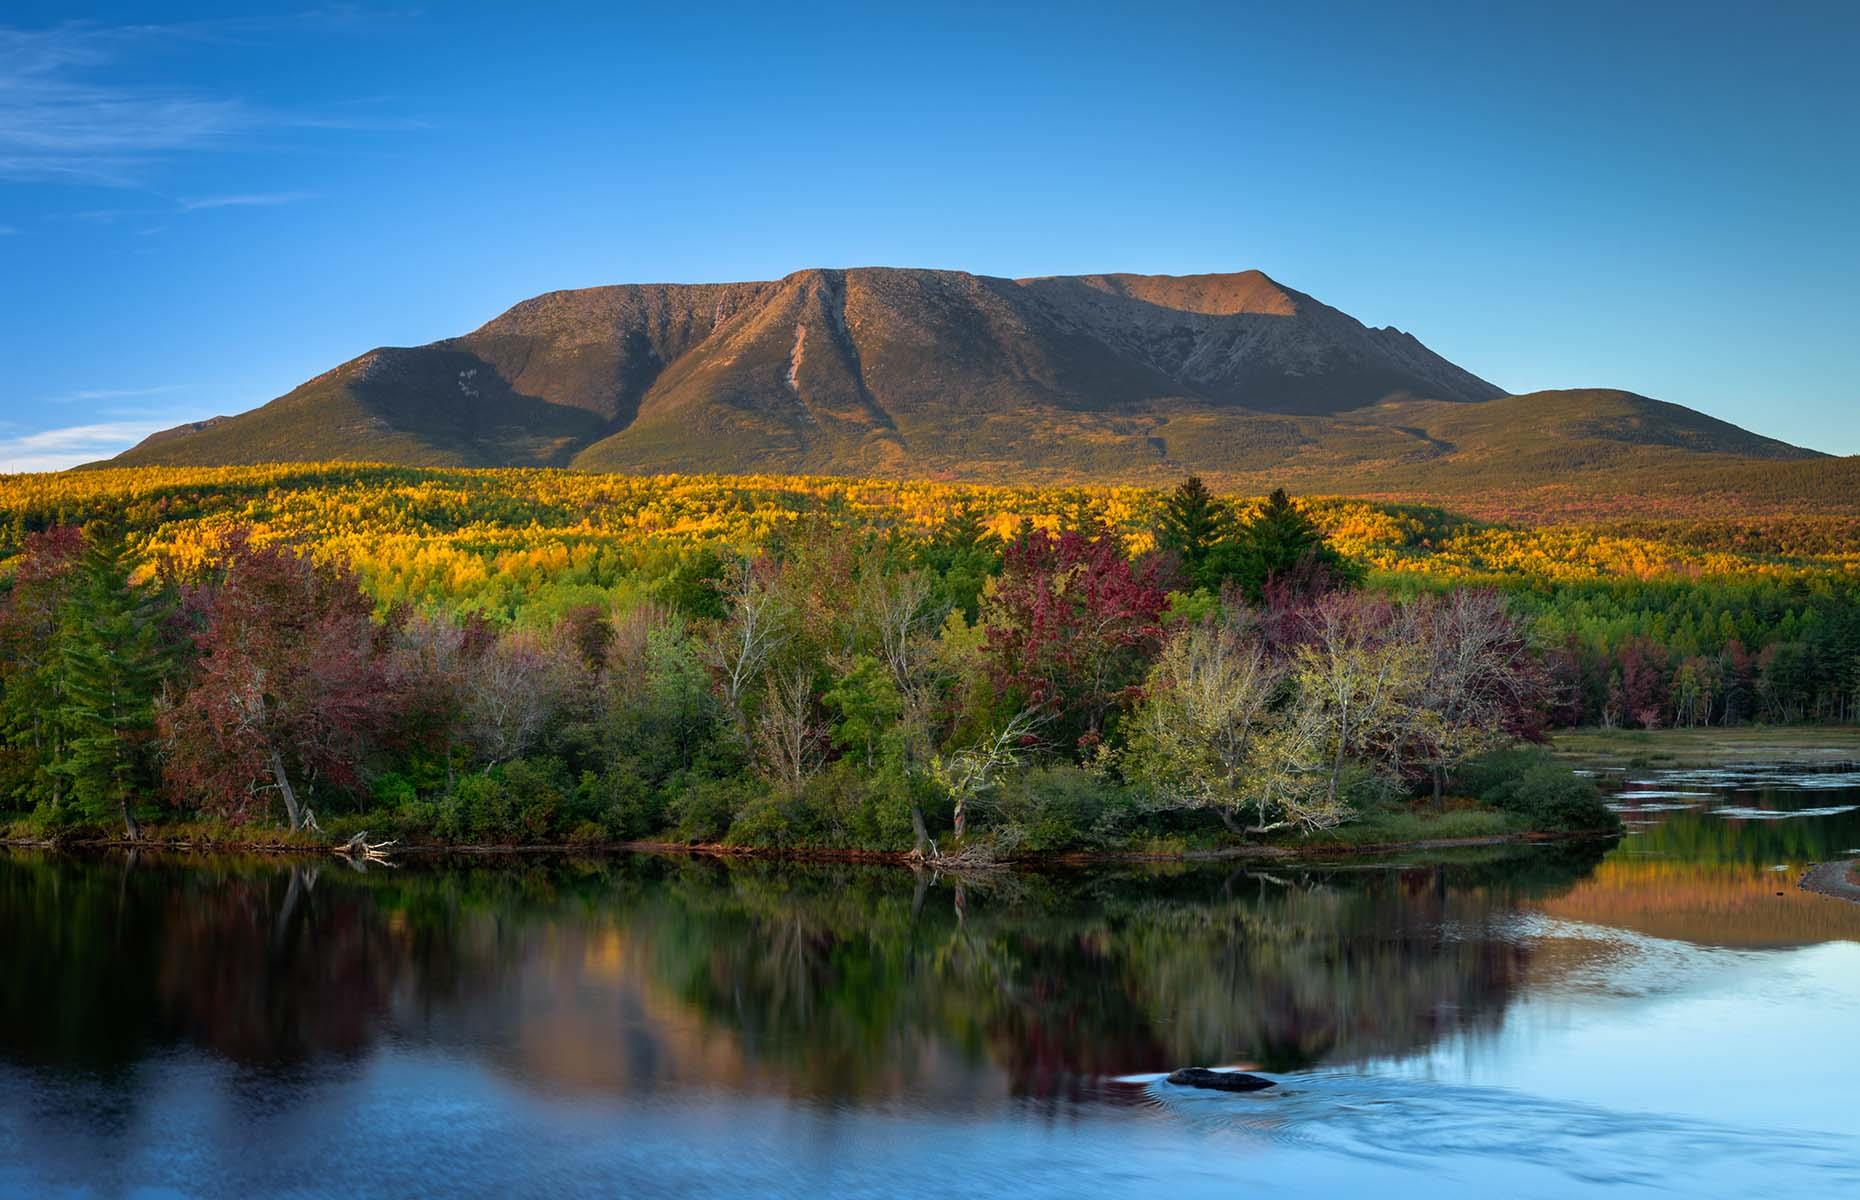 <p>With miles of stunning natural landscape, the drive along <a href="https://www.katahdinwoodsandwaters.com/">this scenic byway</a> is dominated by Katahdin (pictured) – Maine's tallest mountain. Starting at Baxter State Park and following Route 11 and the Penobscot River, the 89-mile (143km) route has several stops along the way, including Ash Hill which provides an incredible view of Katahdin, and the surrounding mountains and forests. Visitors can make the most of the outdoors by canoeing the remote East Branch of the river with its seven waterfalls or whitewater rafting in the West Branch.</p>